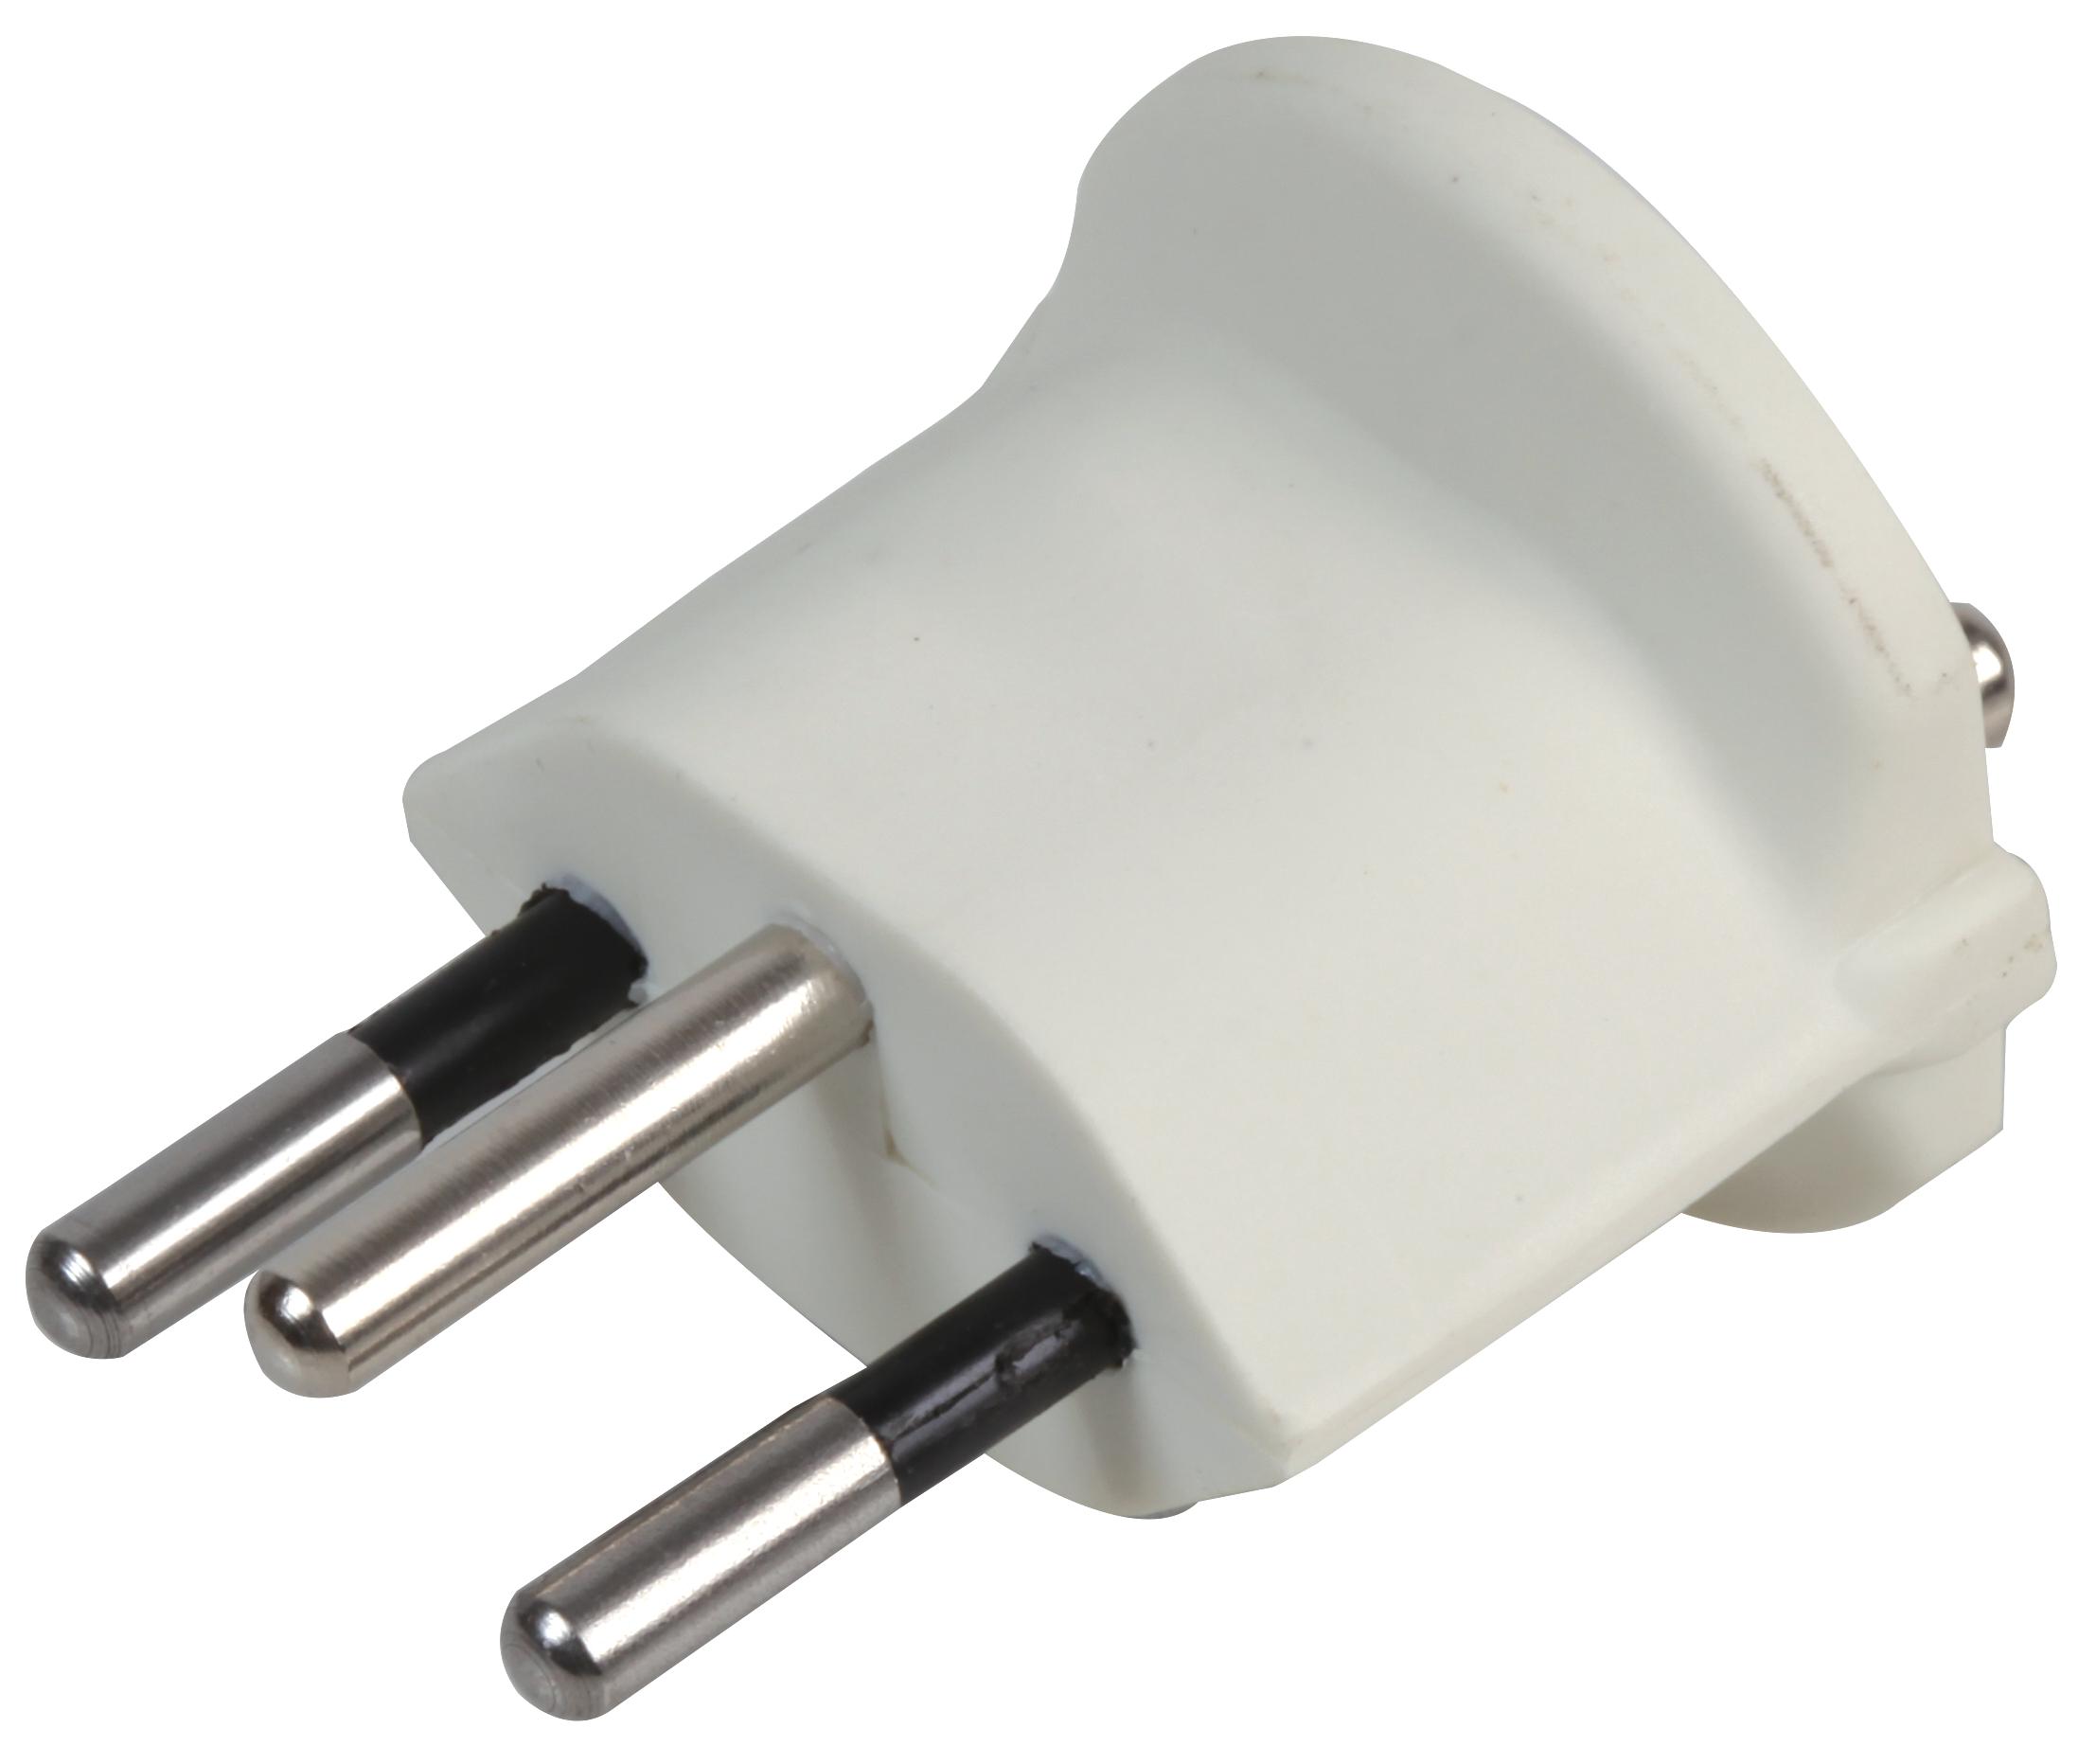 PowerConnectorections Sch3-Wh. White Schuko To Swiss Grounded Cvt Plug